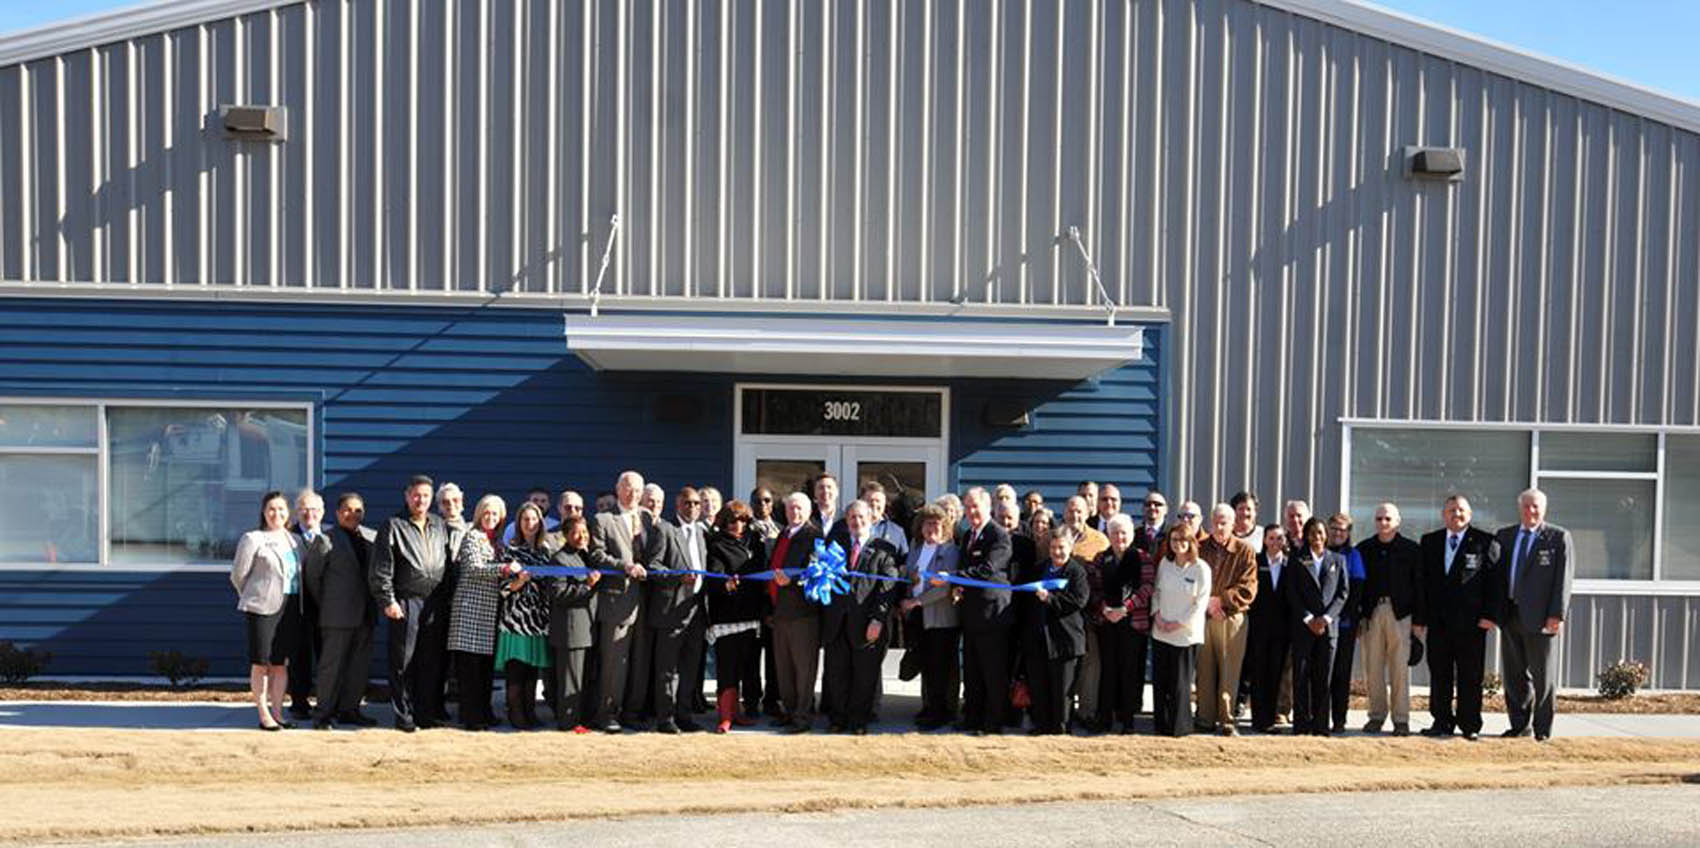 CCCC holds ribbon cutting for new ESTC facility